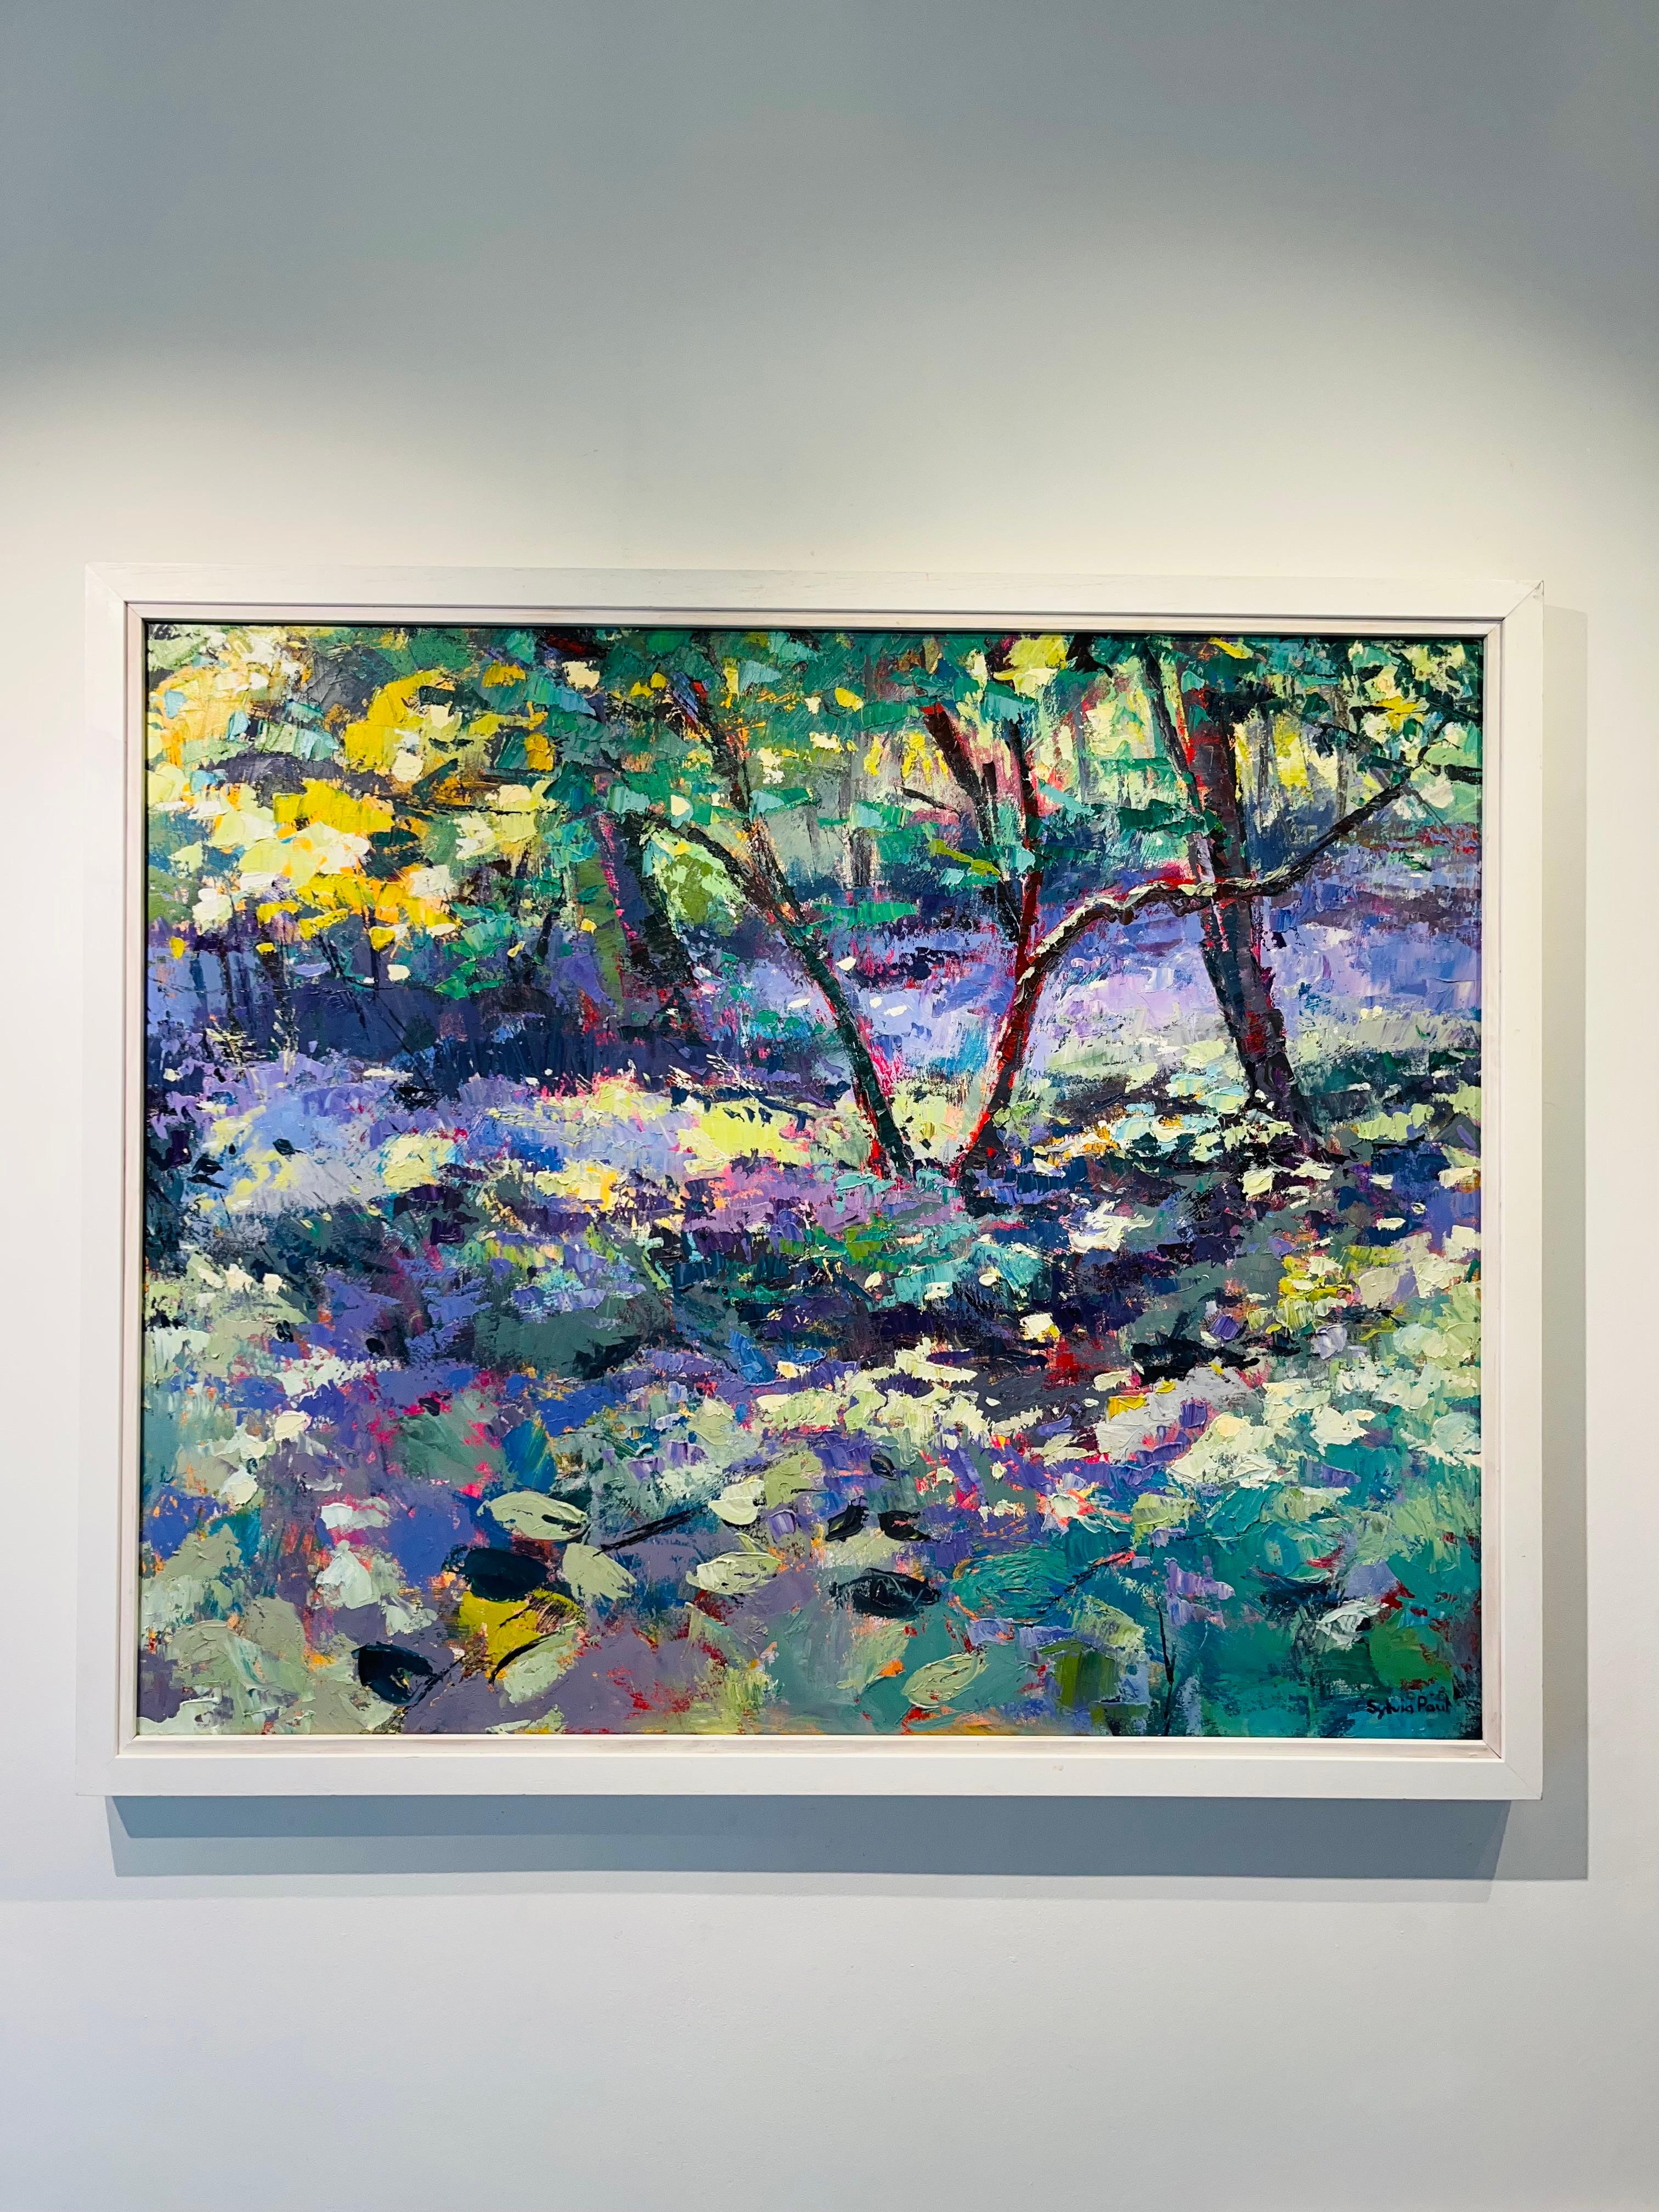 Bluebells Woodland-original abstract floral landscape painting-contemporary Art - Painting by Sylvia Paul